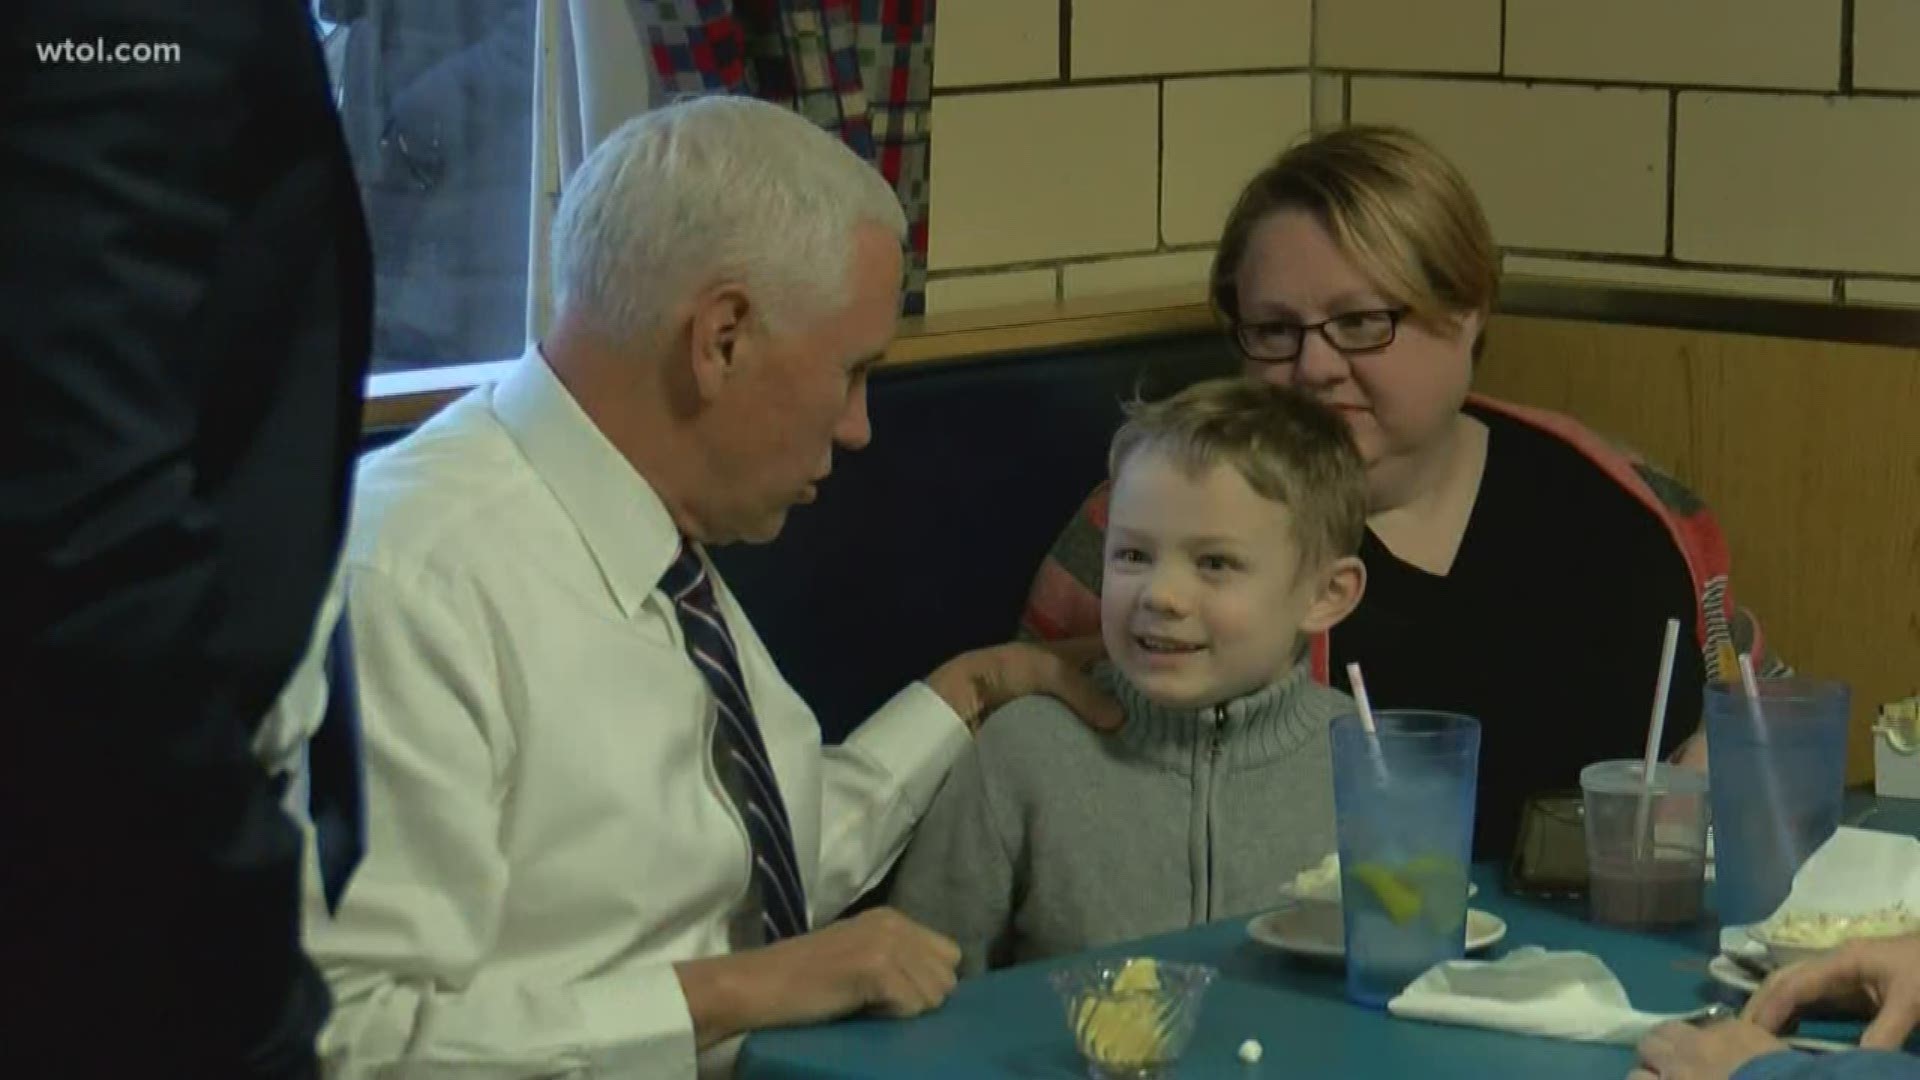 Before the rally at the Huntington Center Thursday, Vice President Mike Pence stopped by Schmucker's Restaurant to meet with customers.